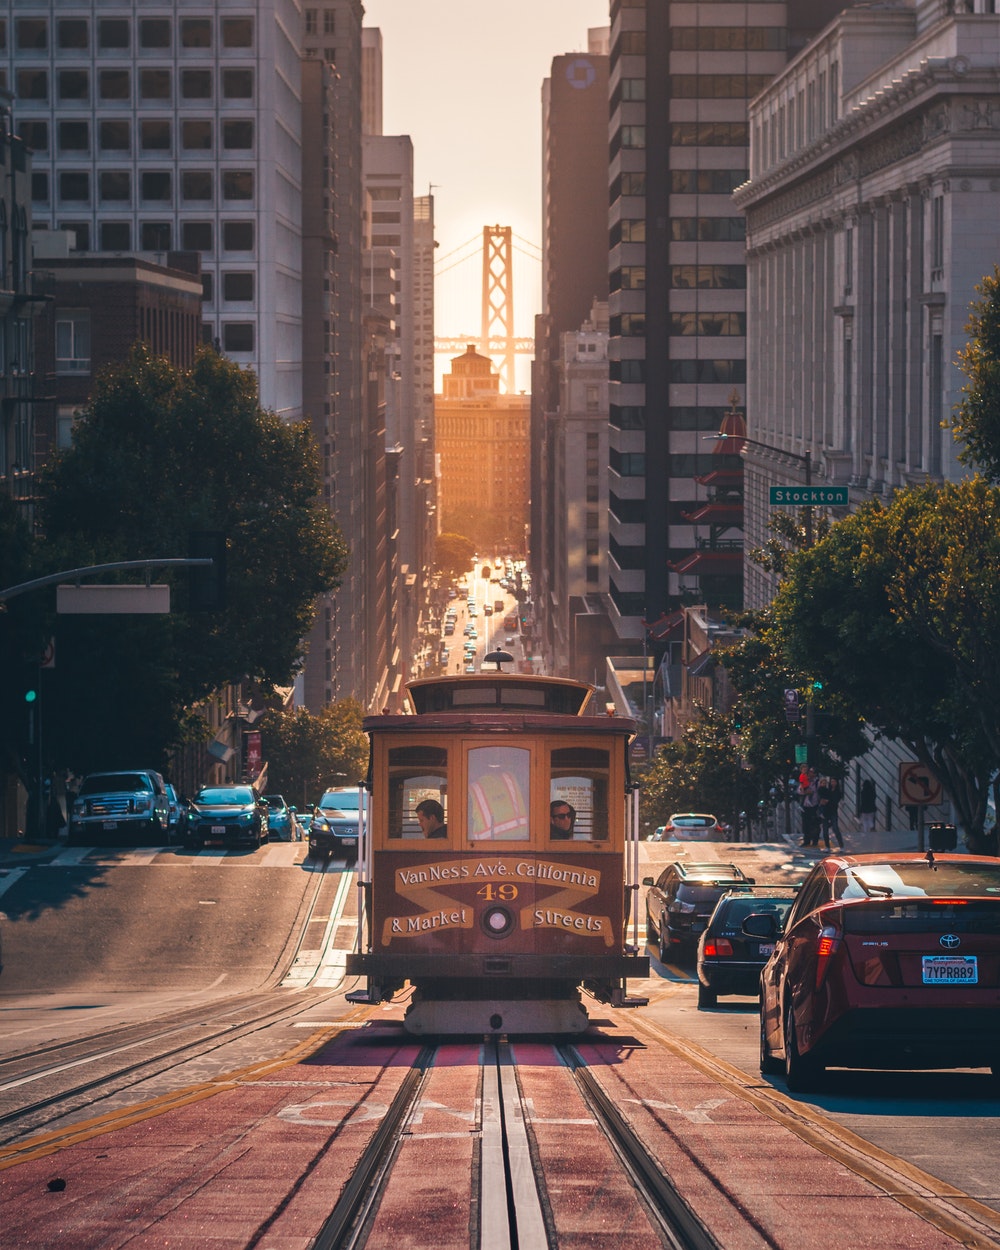 100 San Francisco Pictures [Stunning] Download Free Images on